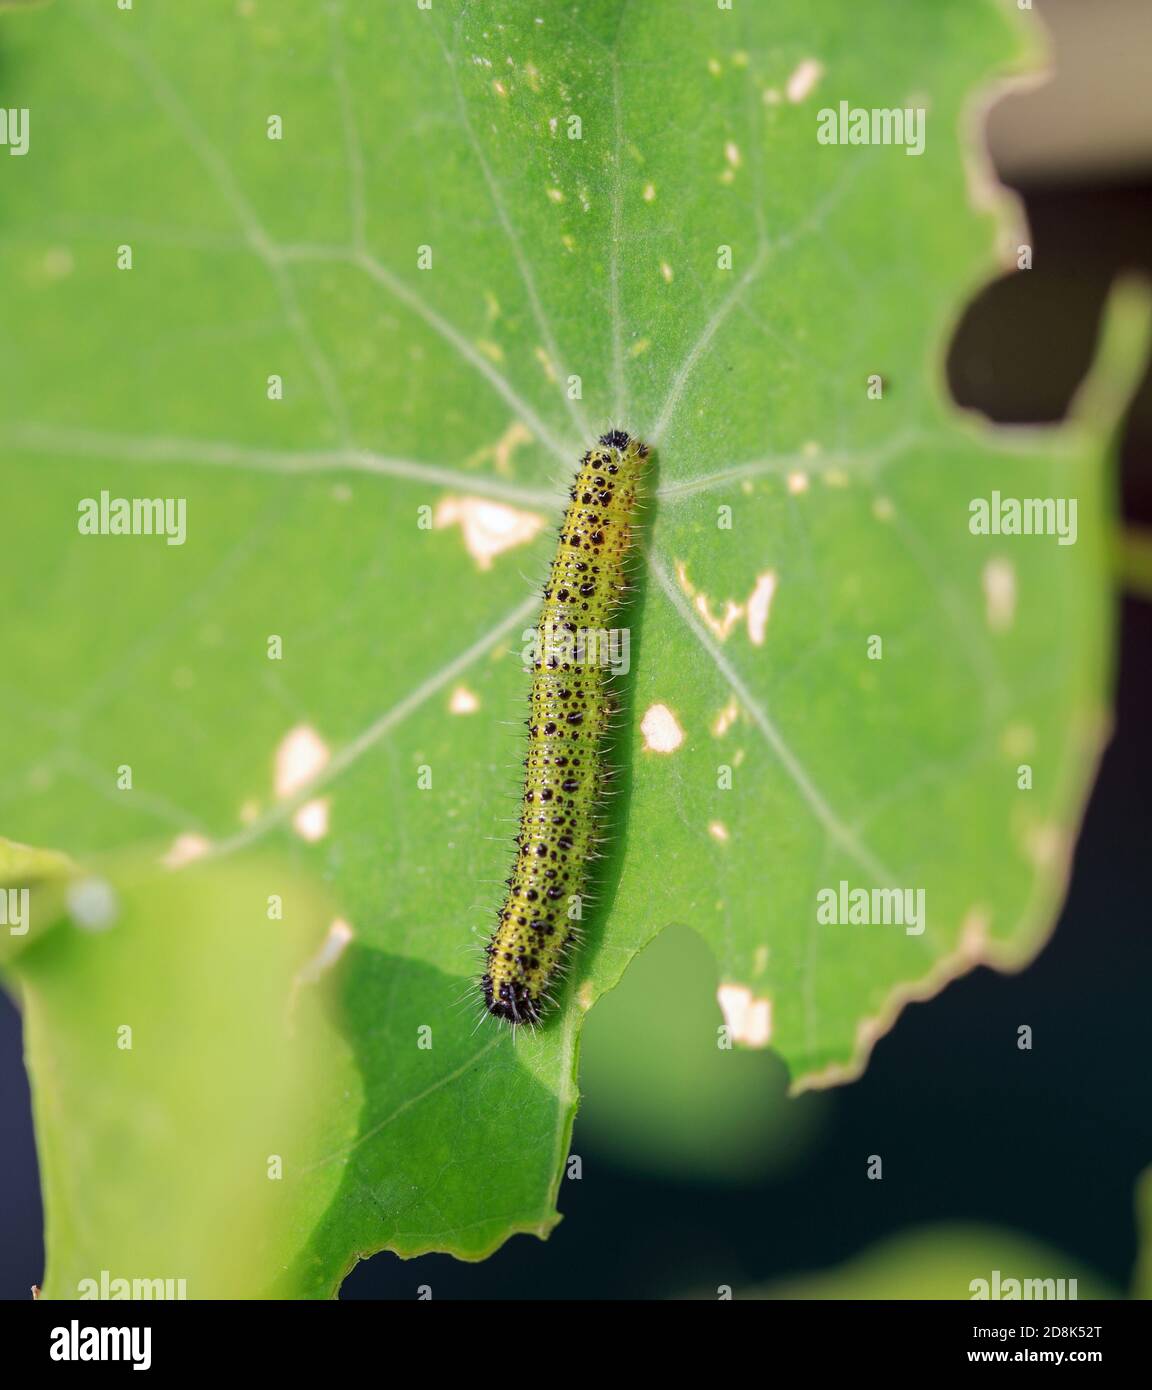 Close up of a white cabbage caterpillar on a bright green nasturtium leaf Stock Photo